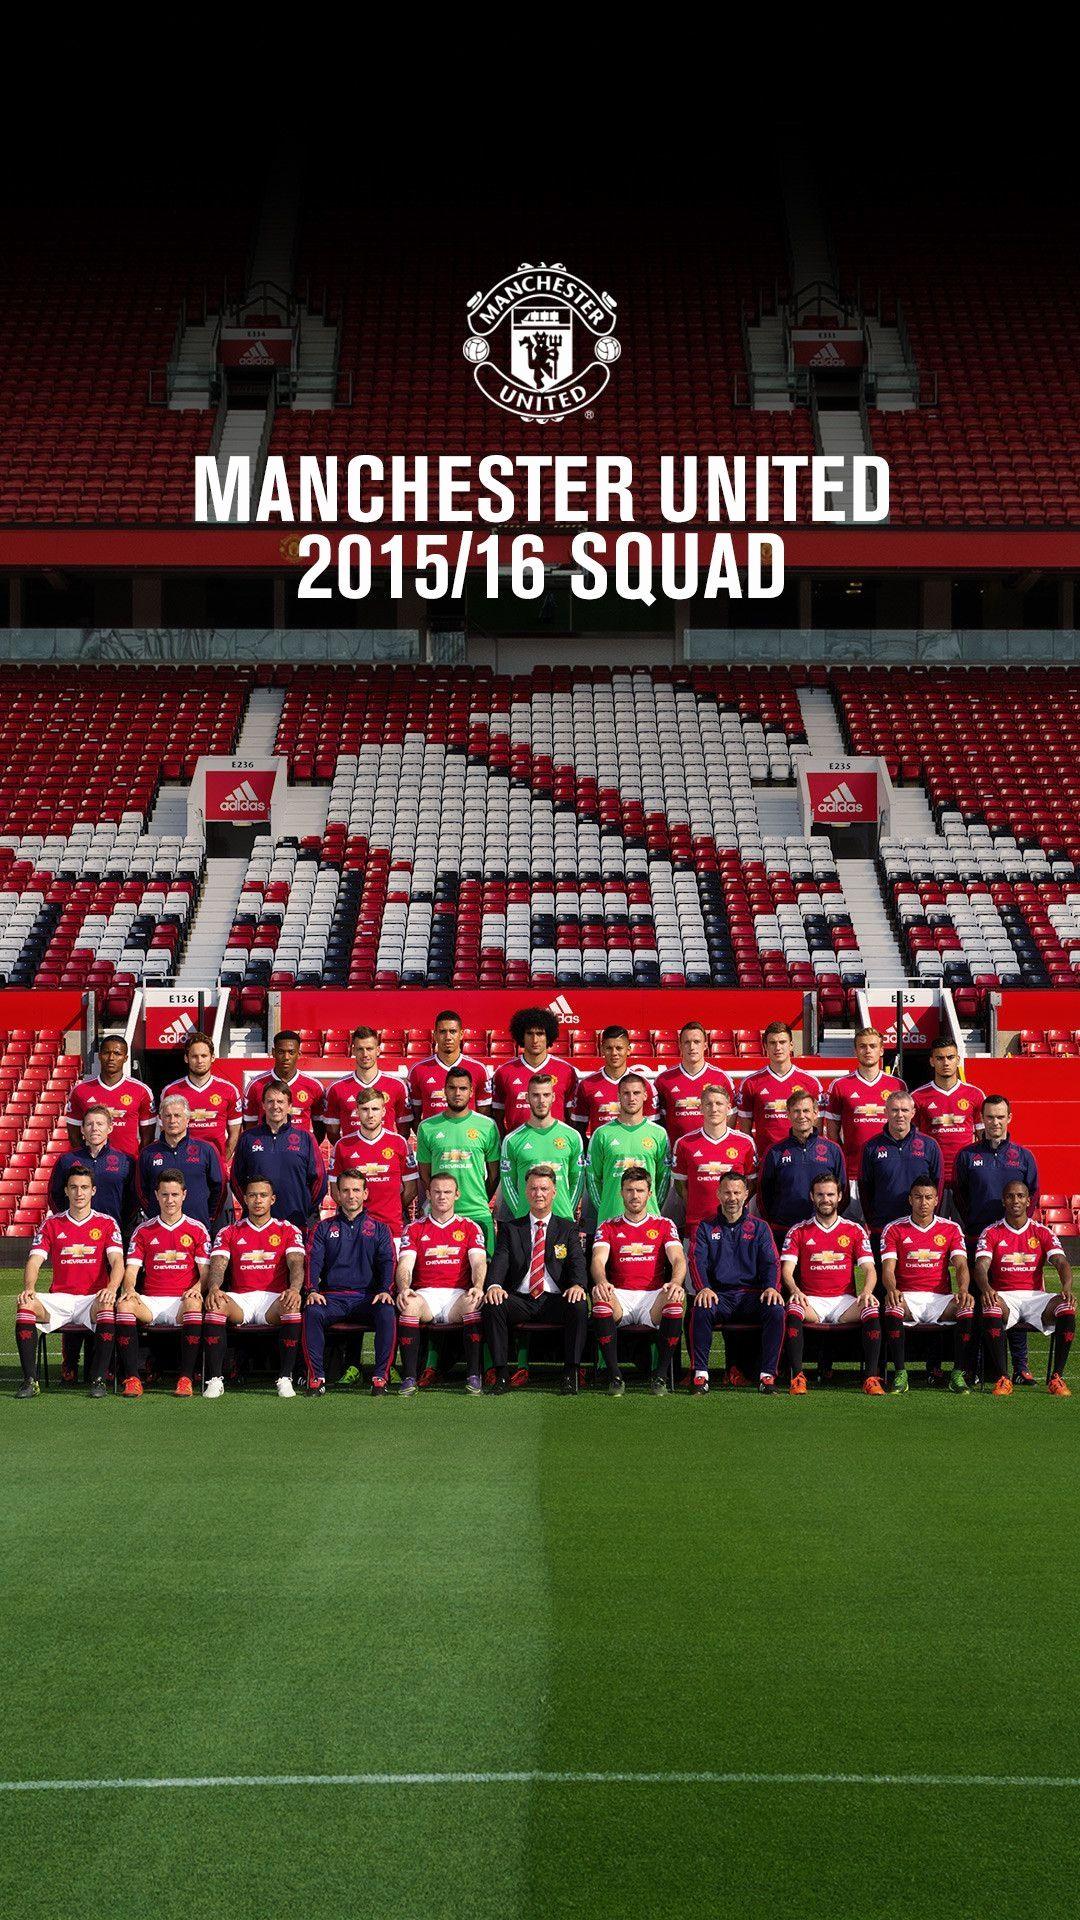 1080x1920 Manchester United Hình nền iPhone Thanh lịch Hình nền Manchester United Team Inspiration - Left of The Hudson